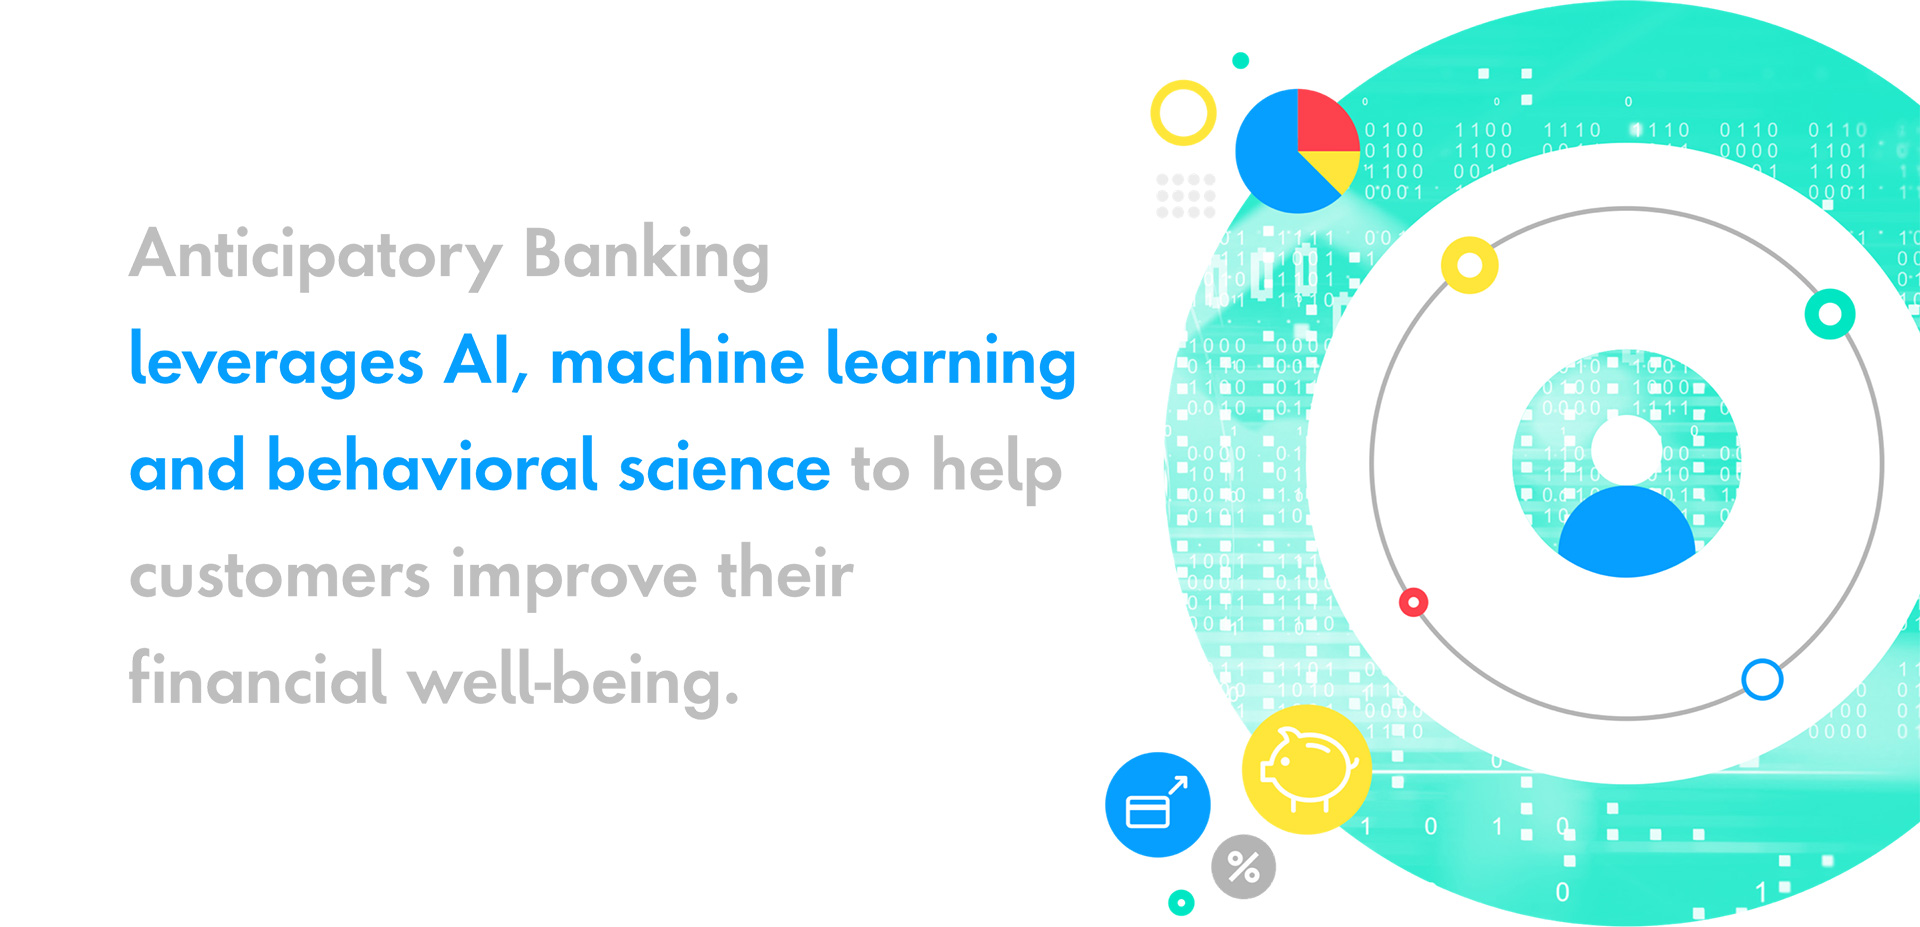 Anticipatory banking leverages AI, machine learning and behavioral science to help customers improve their financial well-being